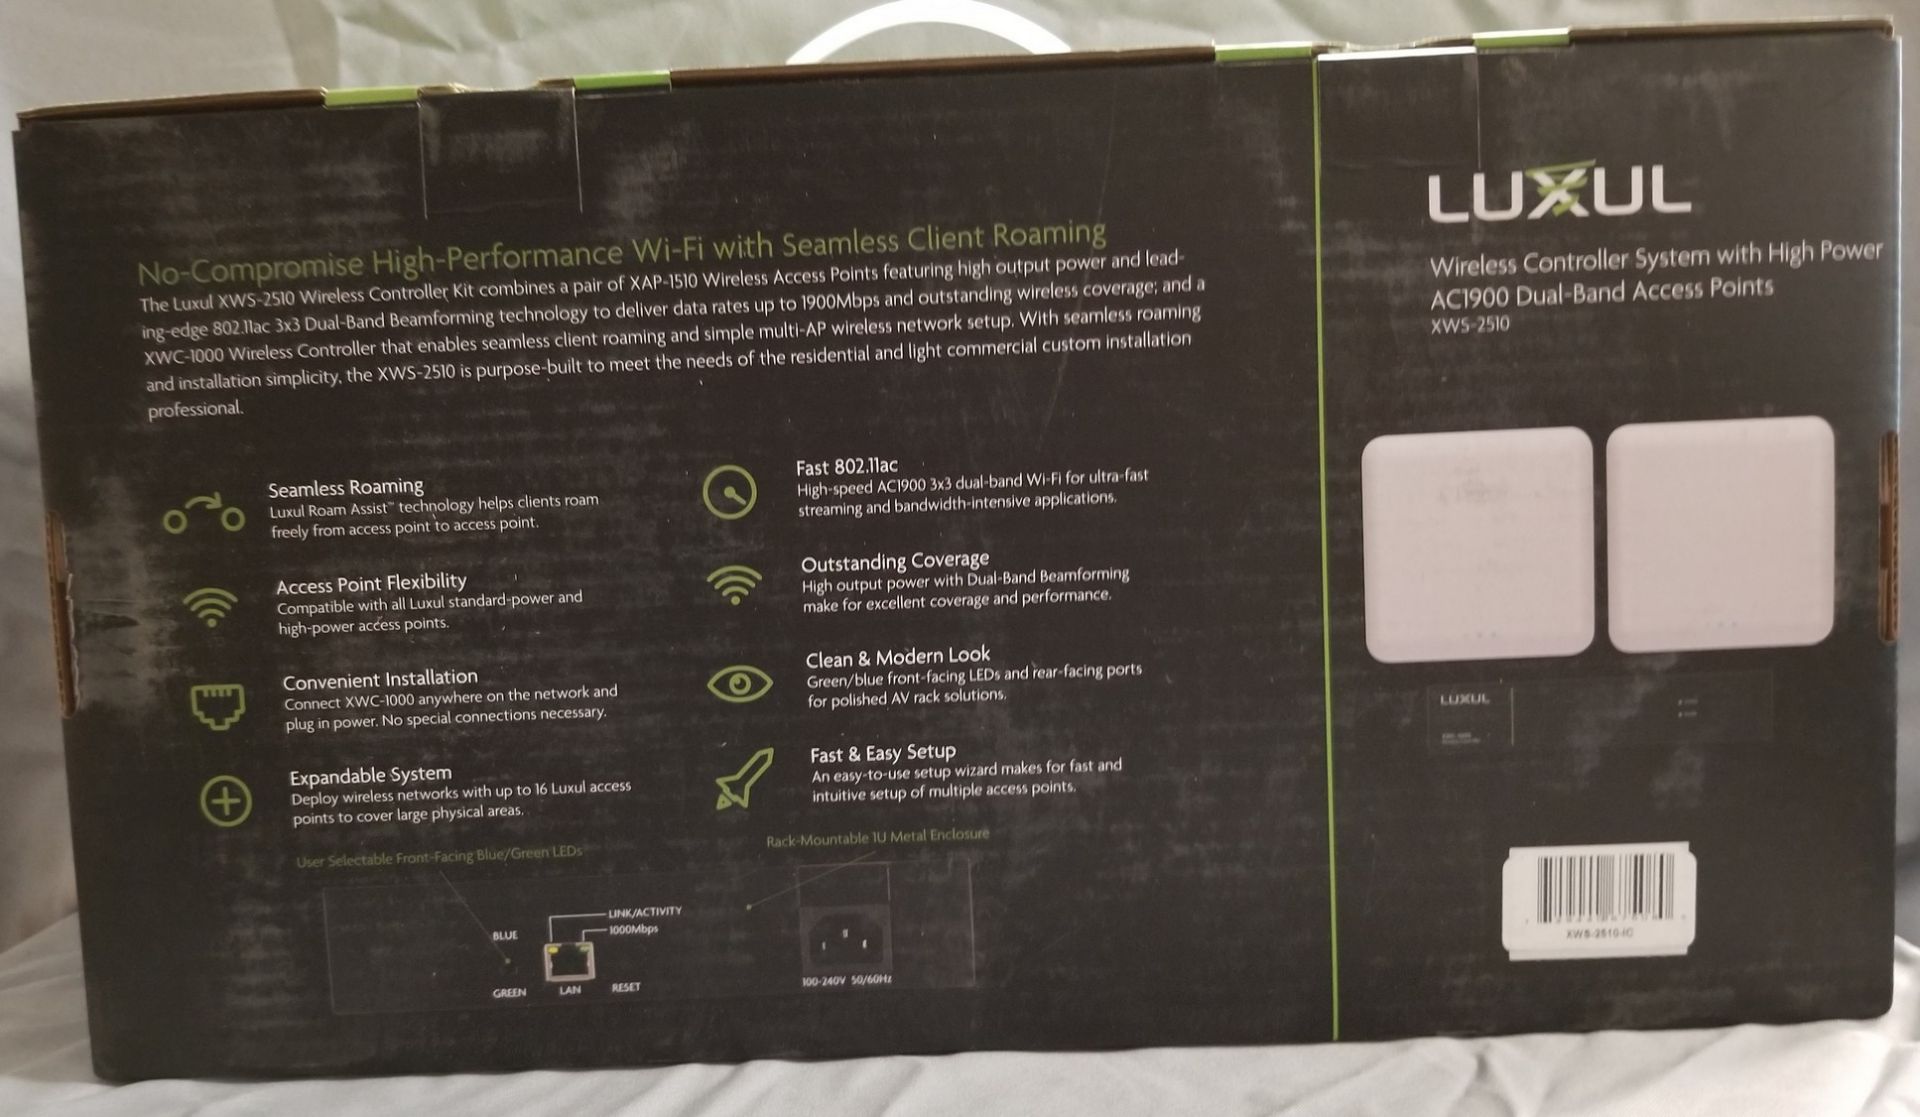 LUXUL, XWS-2510 WIRELESS CONTROLLER SYSTEM WITH HIGH POWER ACI900 DUAL-BAND ACCESS POINTS - (BNIB) - Image 3 of 3